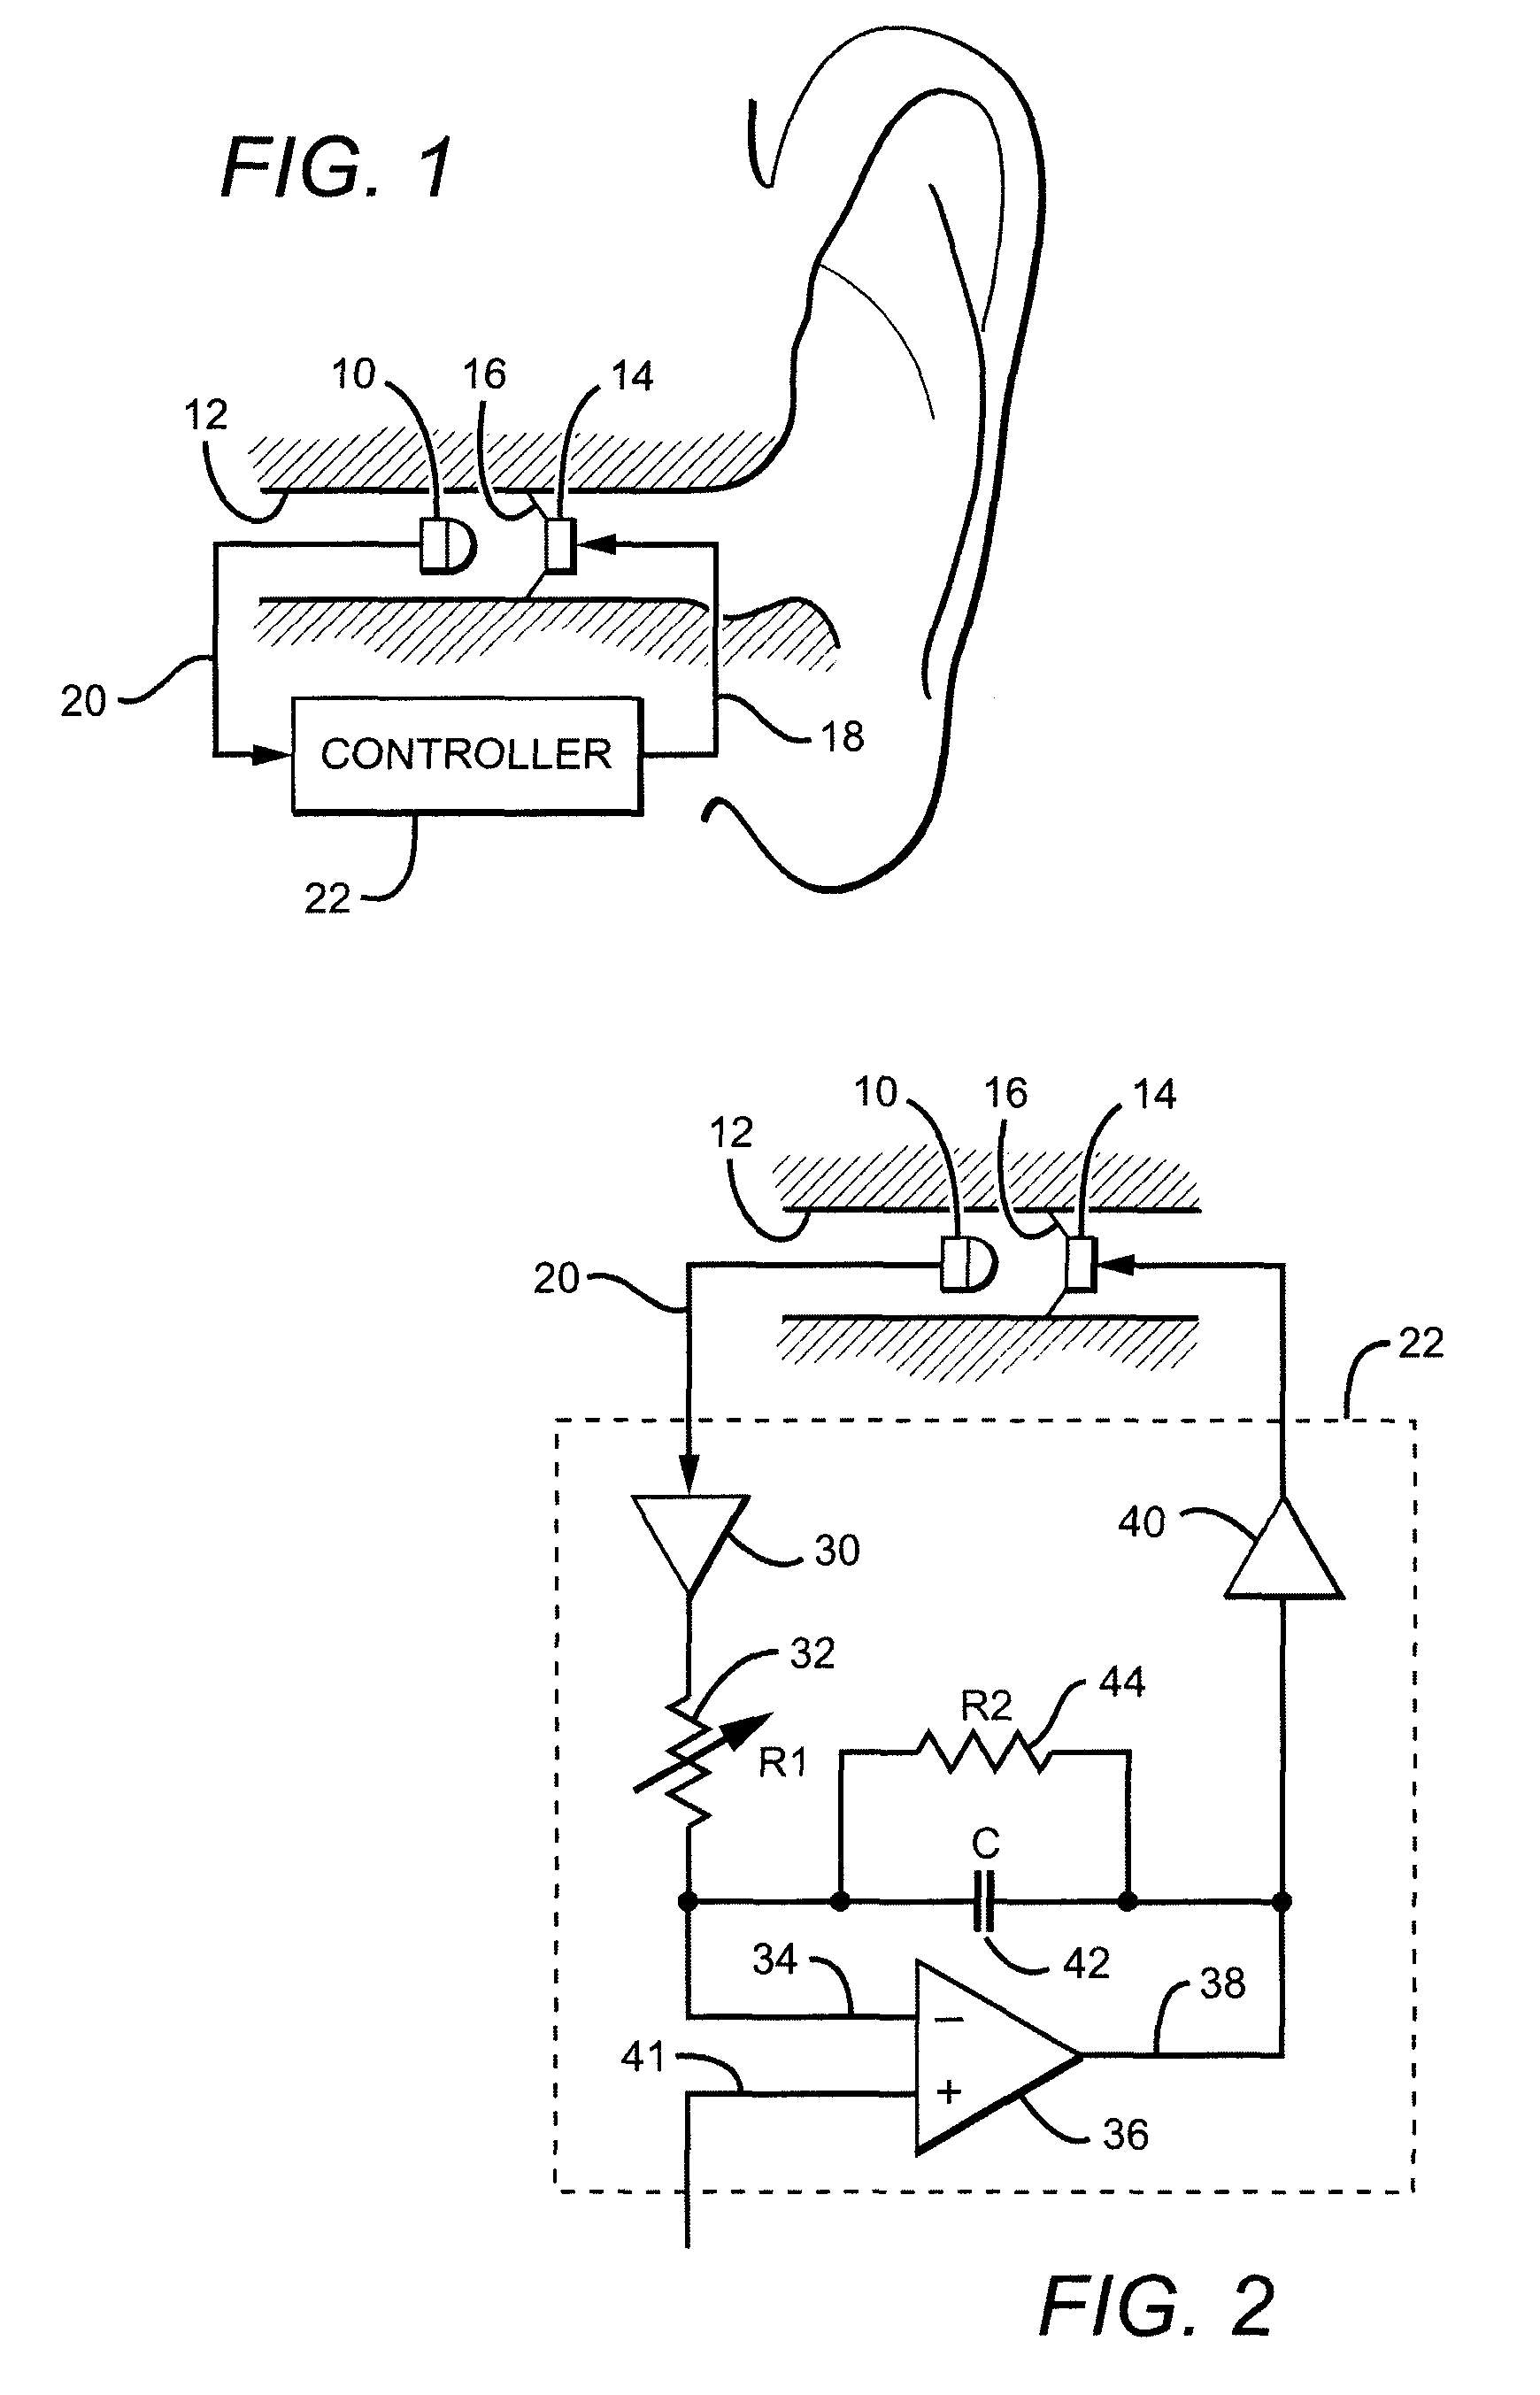 Personal hearing control system and method